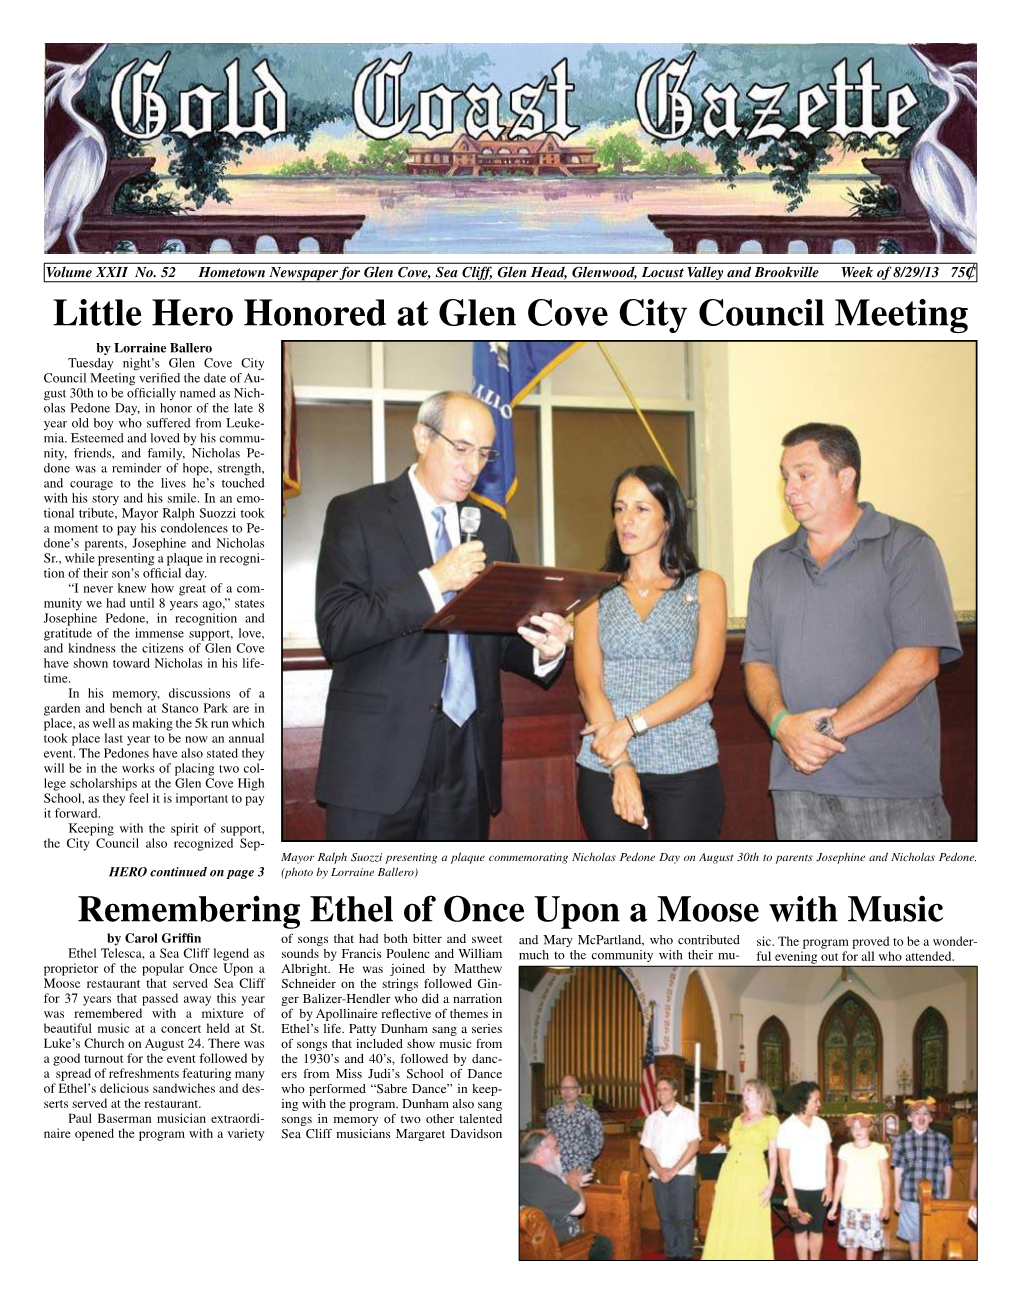 Little Hero Honored at Glen Cove City Council Meeting